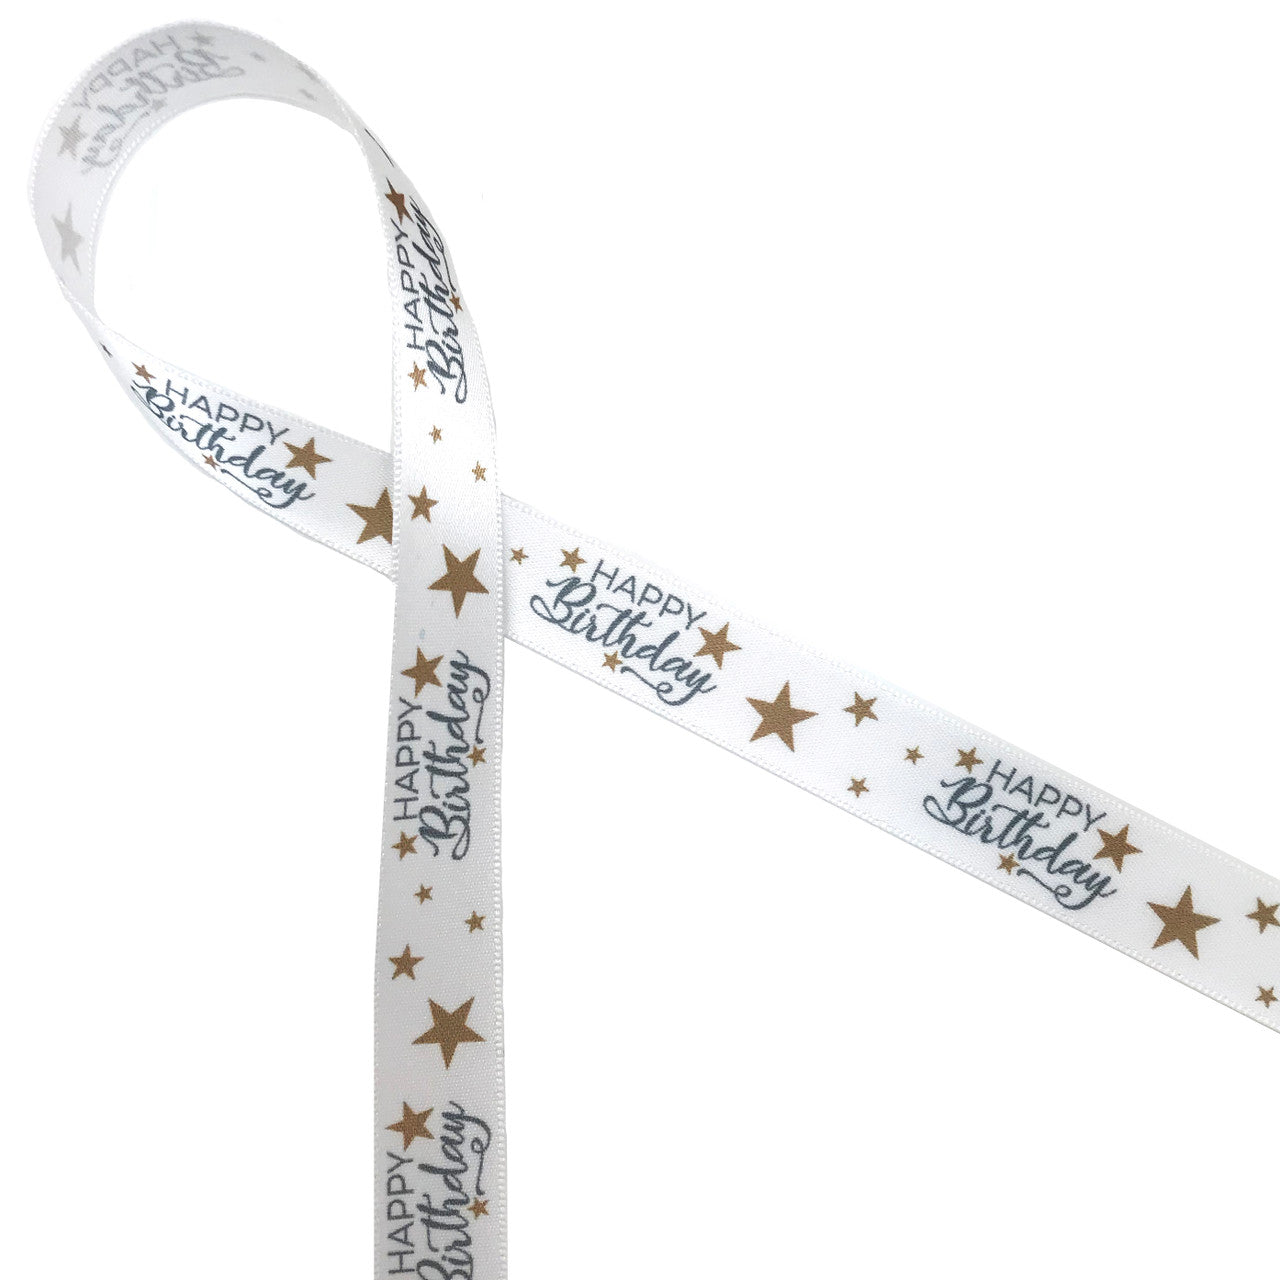 Happy Birthday printed in silver ink with gold stars on 5/8" white single face satin is ideal for a formal Birthday party. This is the perfect ribbon for a 50th Birthday party!